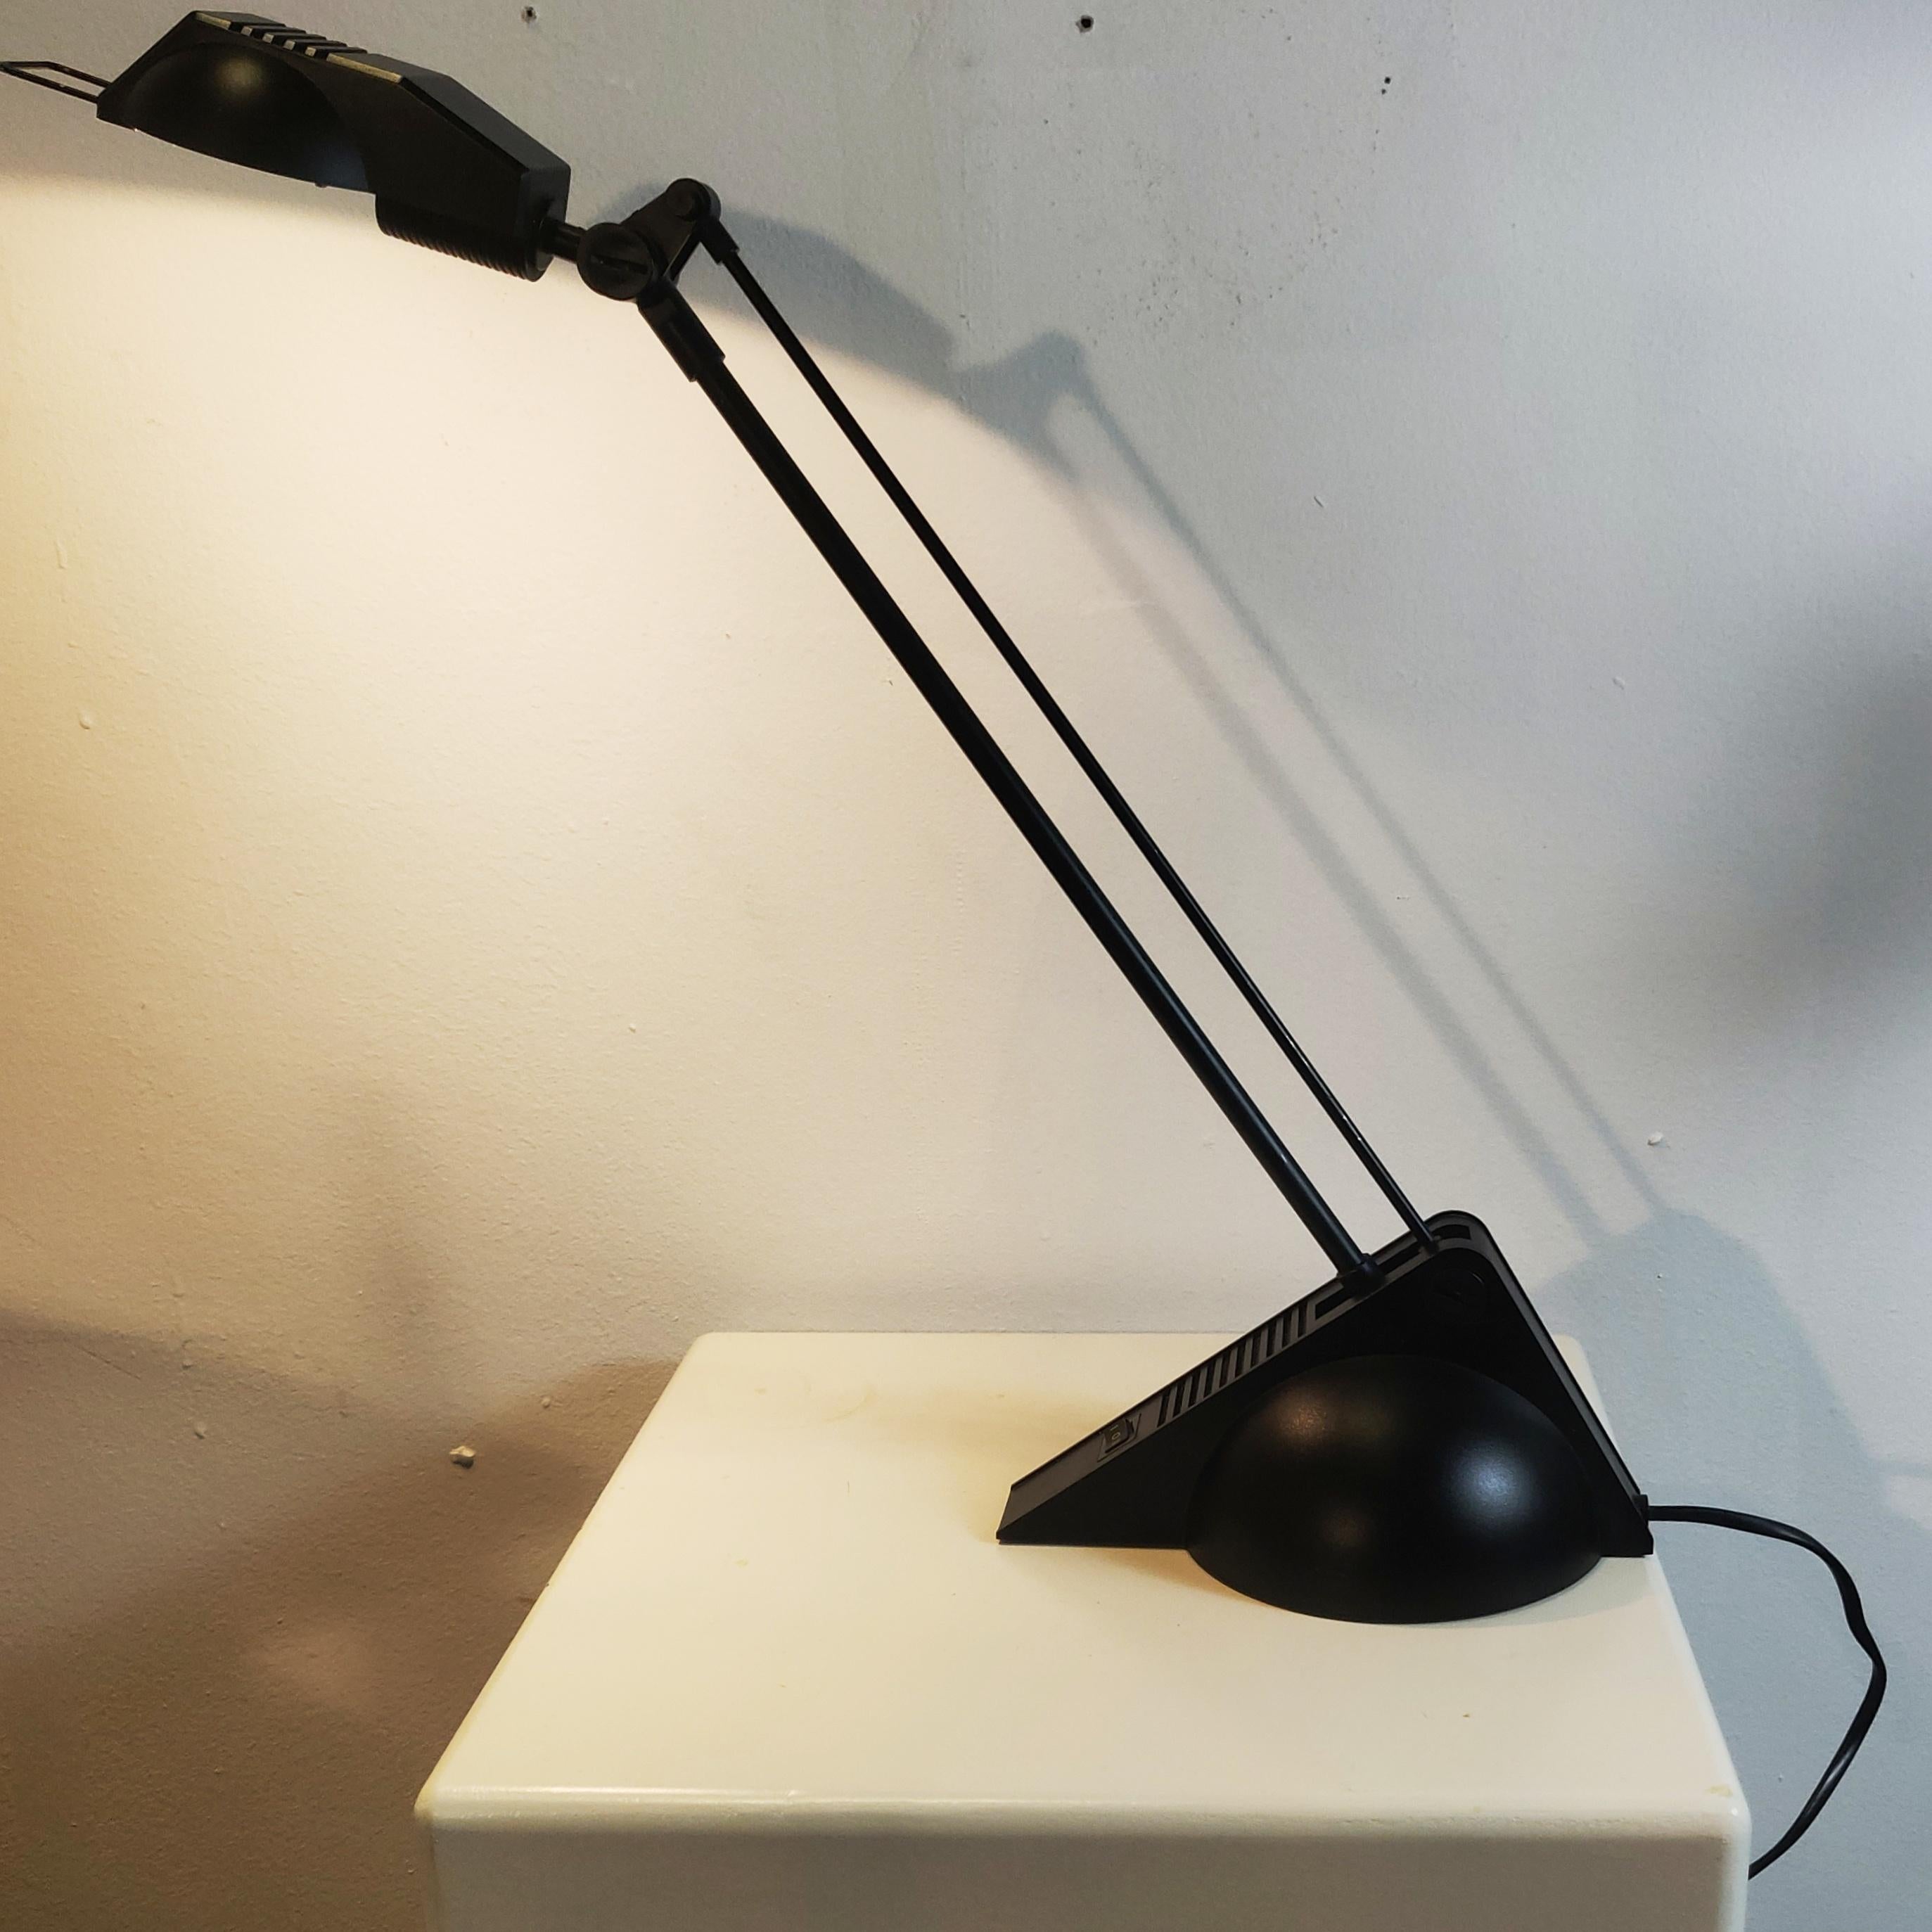 This desk lamp is made in the famous Memphis style. The Italian Memphis Group was a design and architecture group founded by Ettore Sottsass (1917-2007) in 1981 in Milan which designed Postmodern furniture, lights, fabrics, ceramics, glass, acrylic